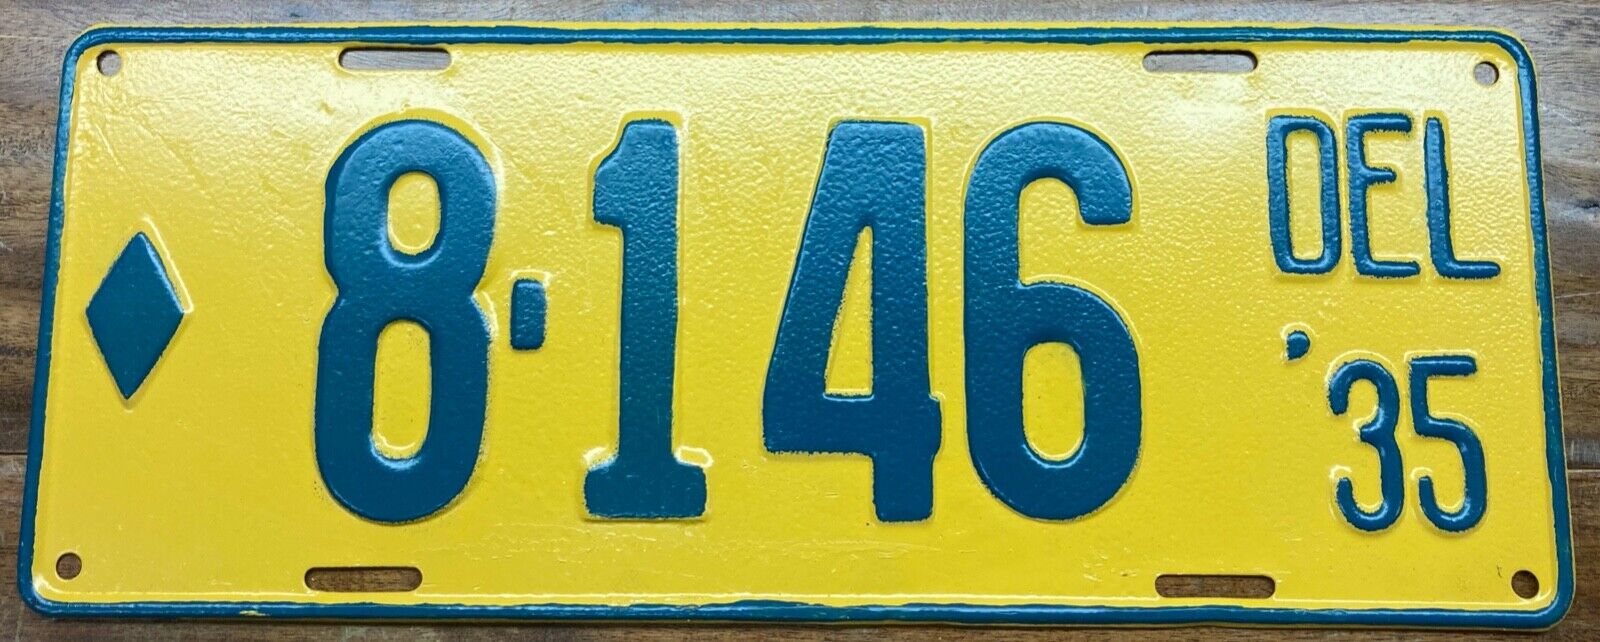 STRAIGHT, ROCK SOLID, REPAINTED 1935 DELAWARE LICENSE PLATE, LOW NUMBER 8 146